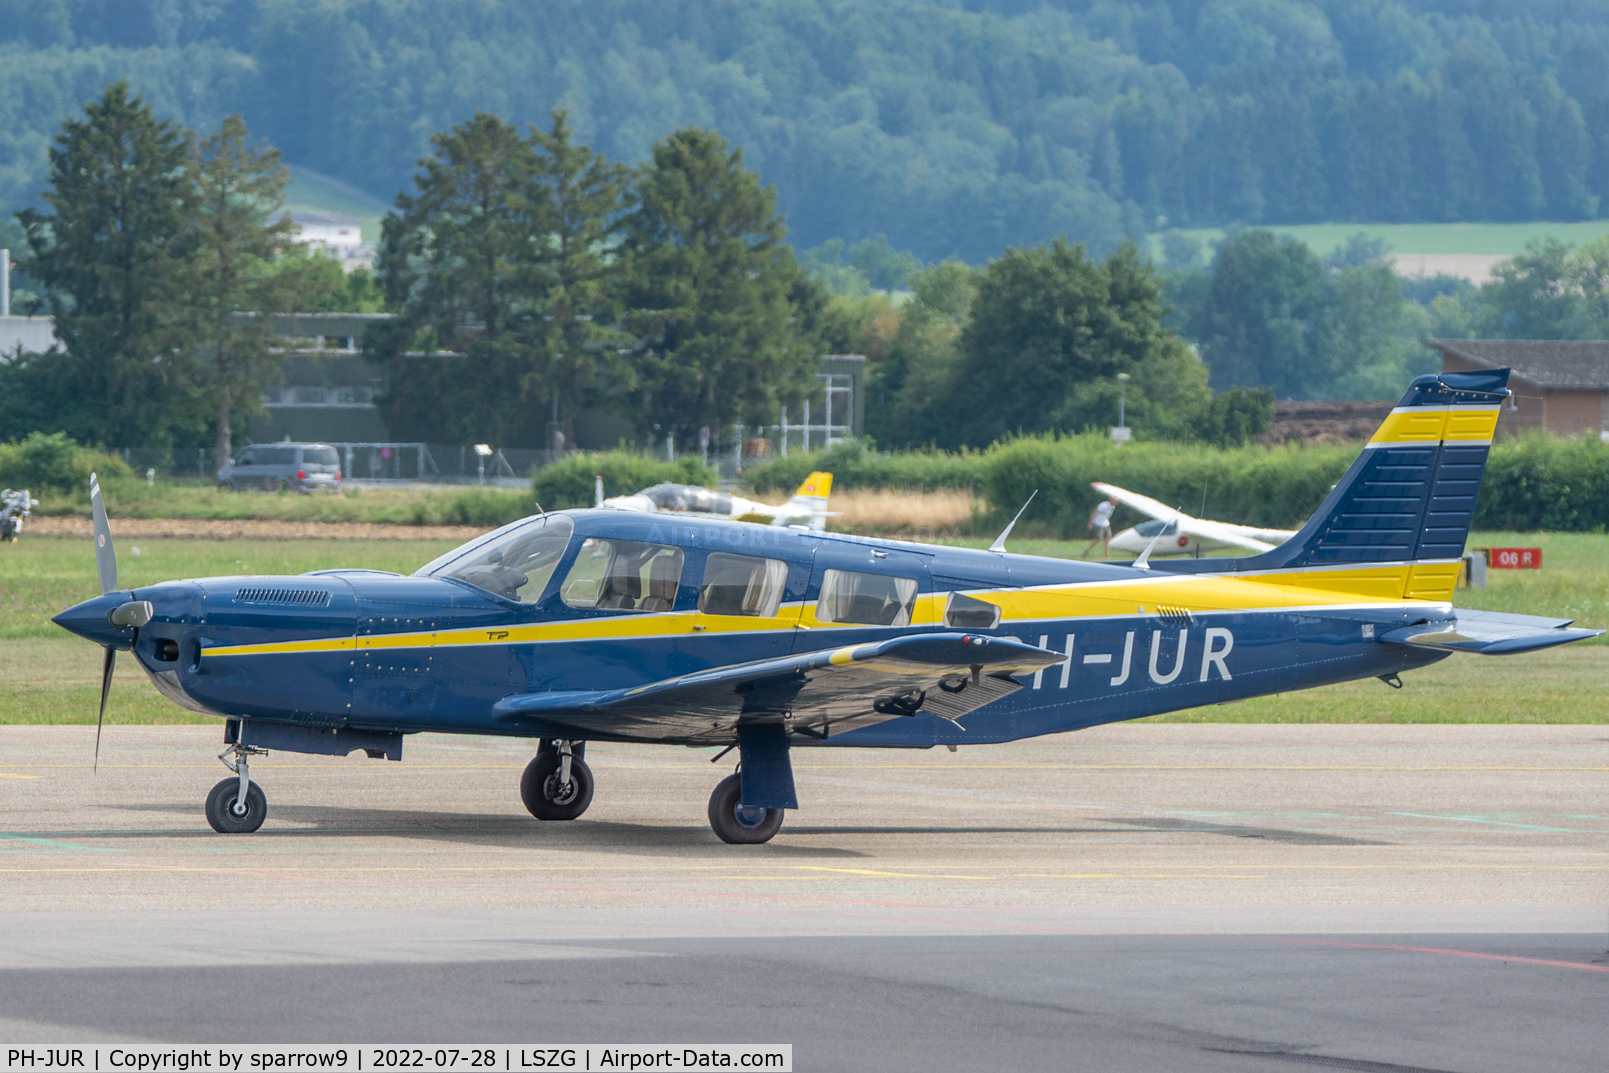 PH-JUR, 1982 Piper PA-32R-301T Turbo Saratoga C/N 32R-8229033, A guest at Grenchen